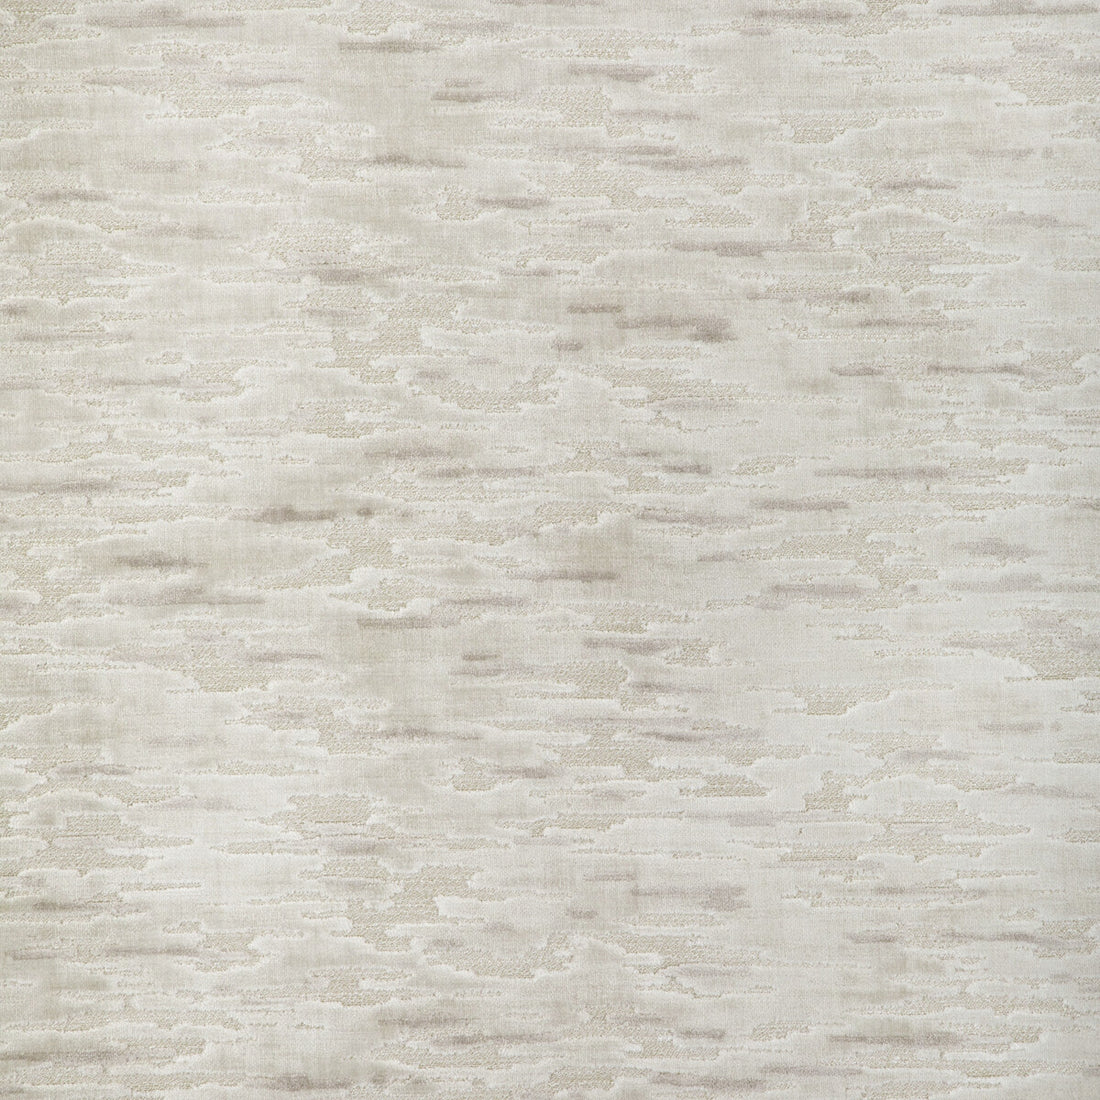 Floating Cloud fabric in pearl color - pattern 36798.116.0 - by Kravet Design in the Candice Olson collection